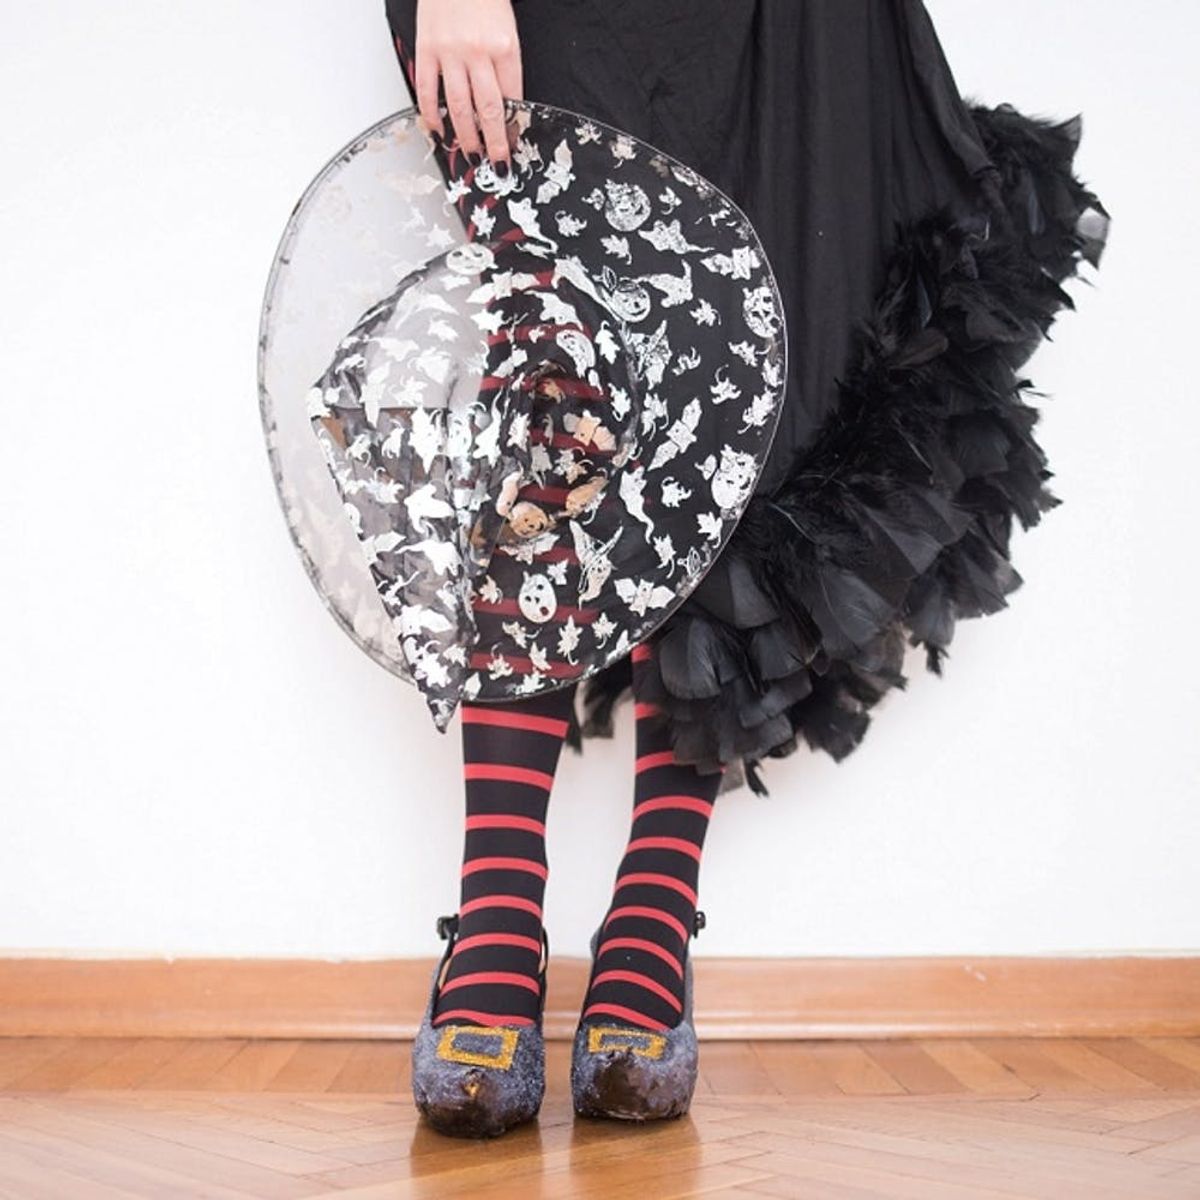 How to DIY Super Easy Witch Shoes for Your Last Minute Halloween Costume